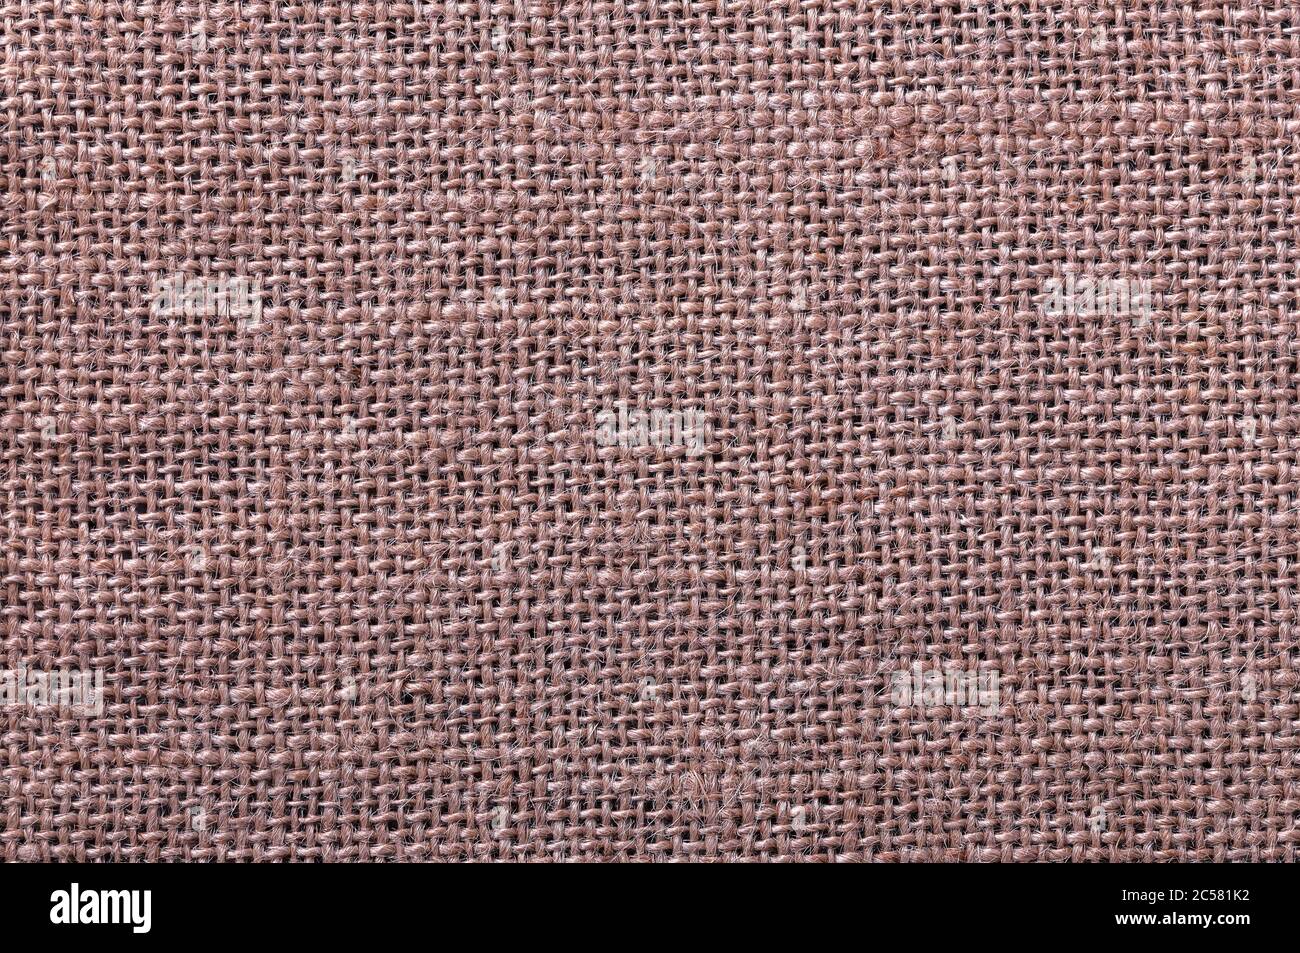 Skein of Coarse Brown Thread Stock Image - Image of fabric, buildings:  36824177